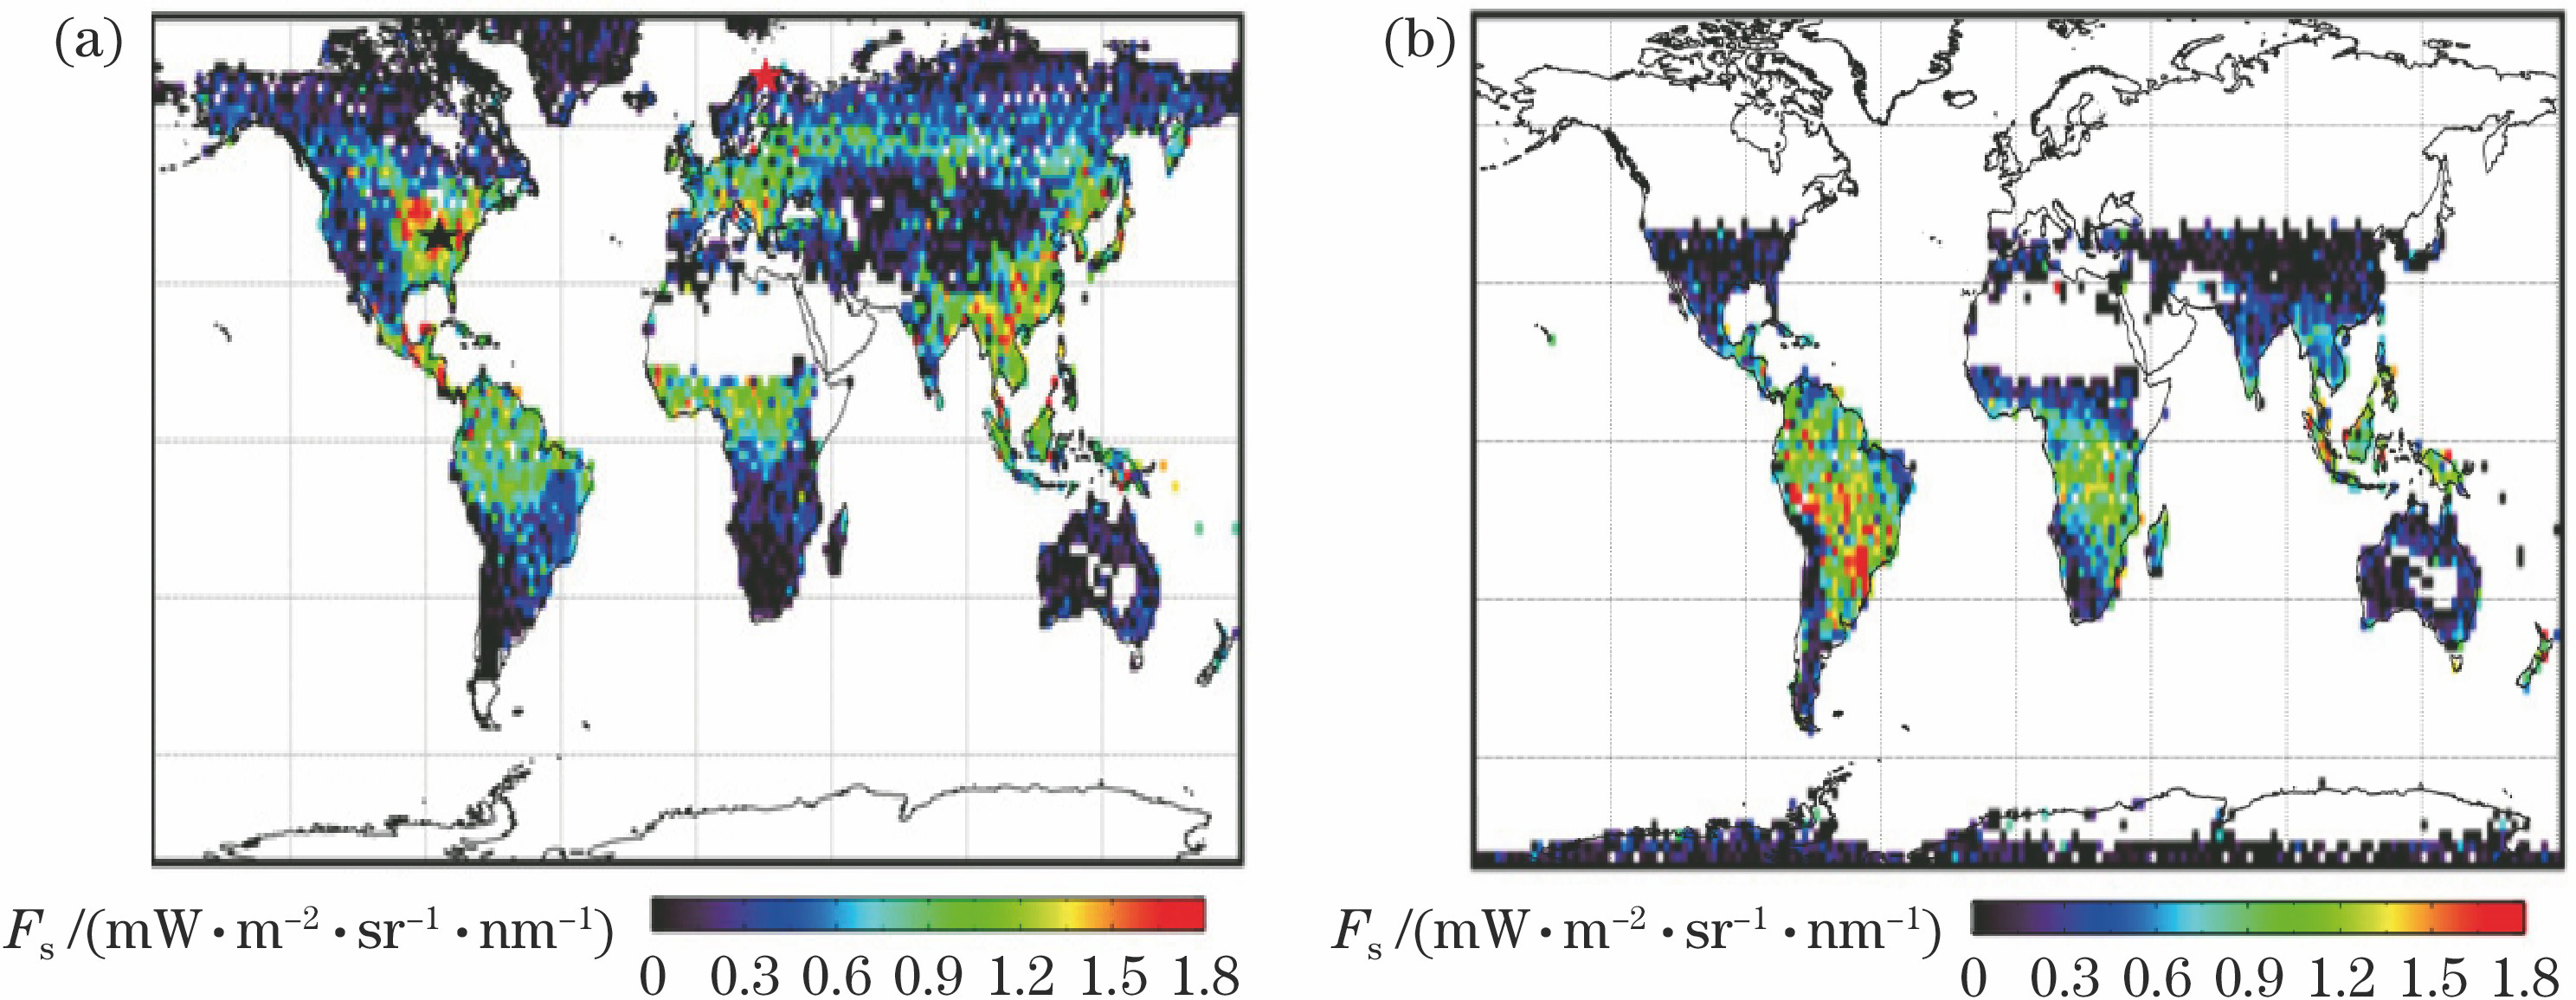 Global fluorescence maps (composites from retrievals at 755 nm) . (a) July 2012; (b) December 2012[13]